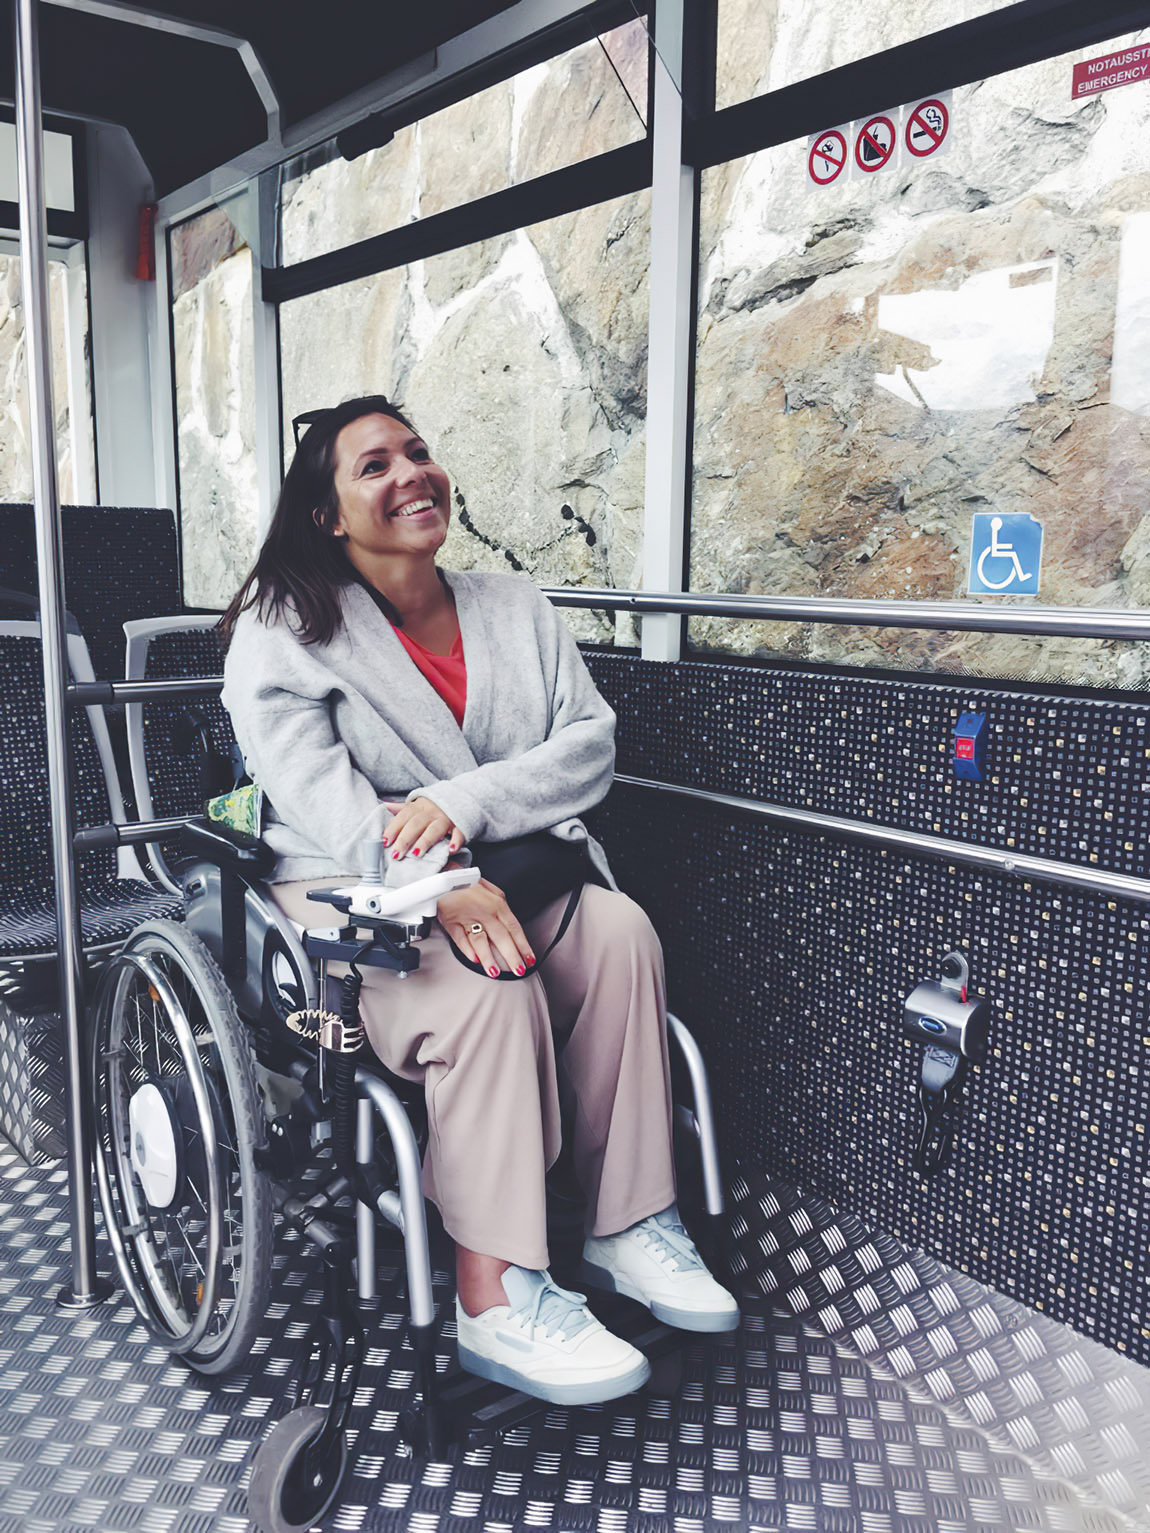 BATHING IN THE CLOUDS – EXPLORING THE MOUNTAINS IN A WHEELCHAIR